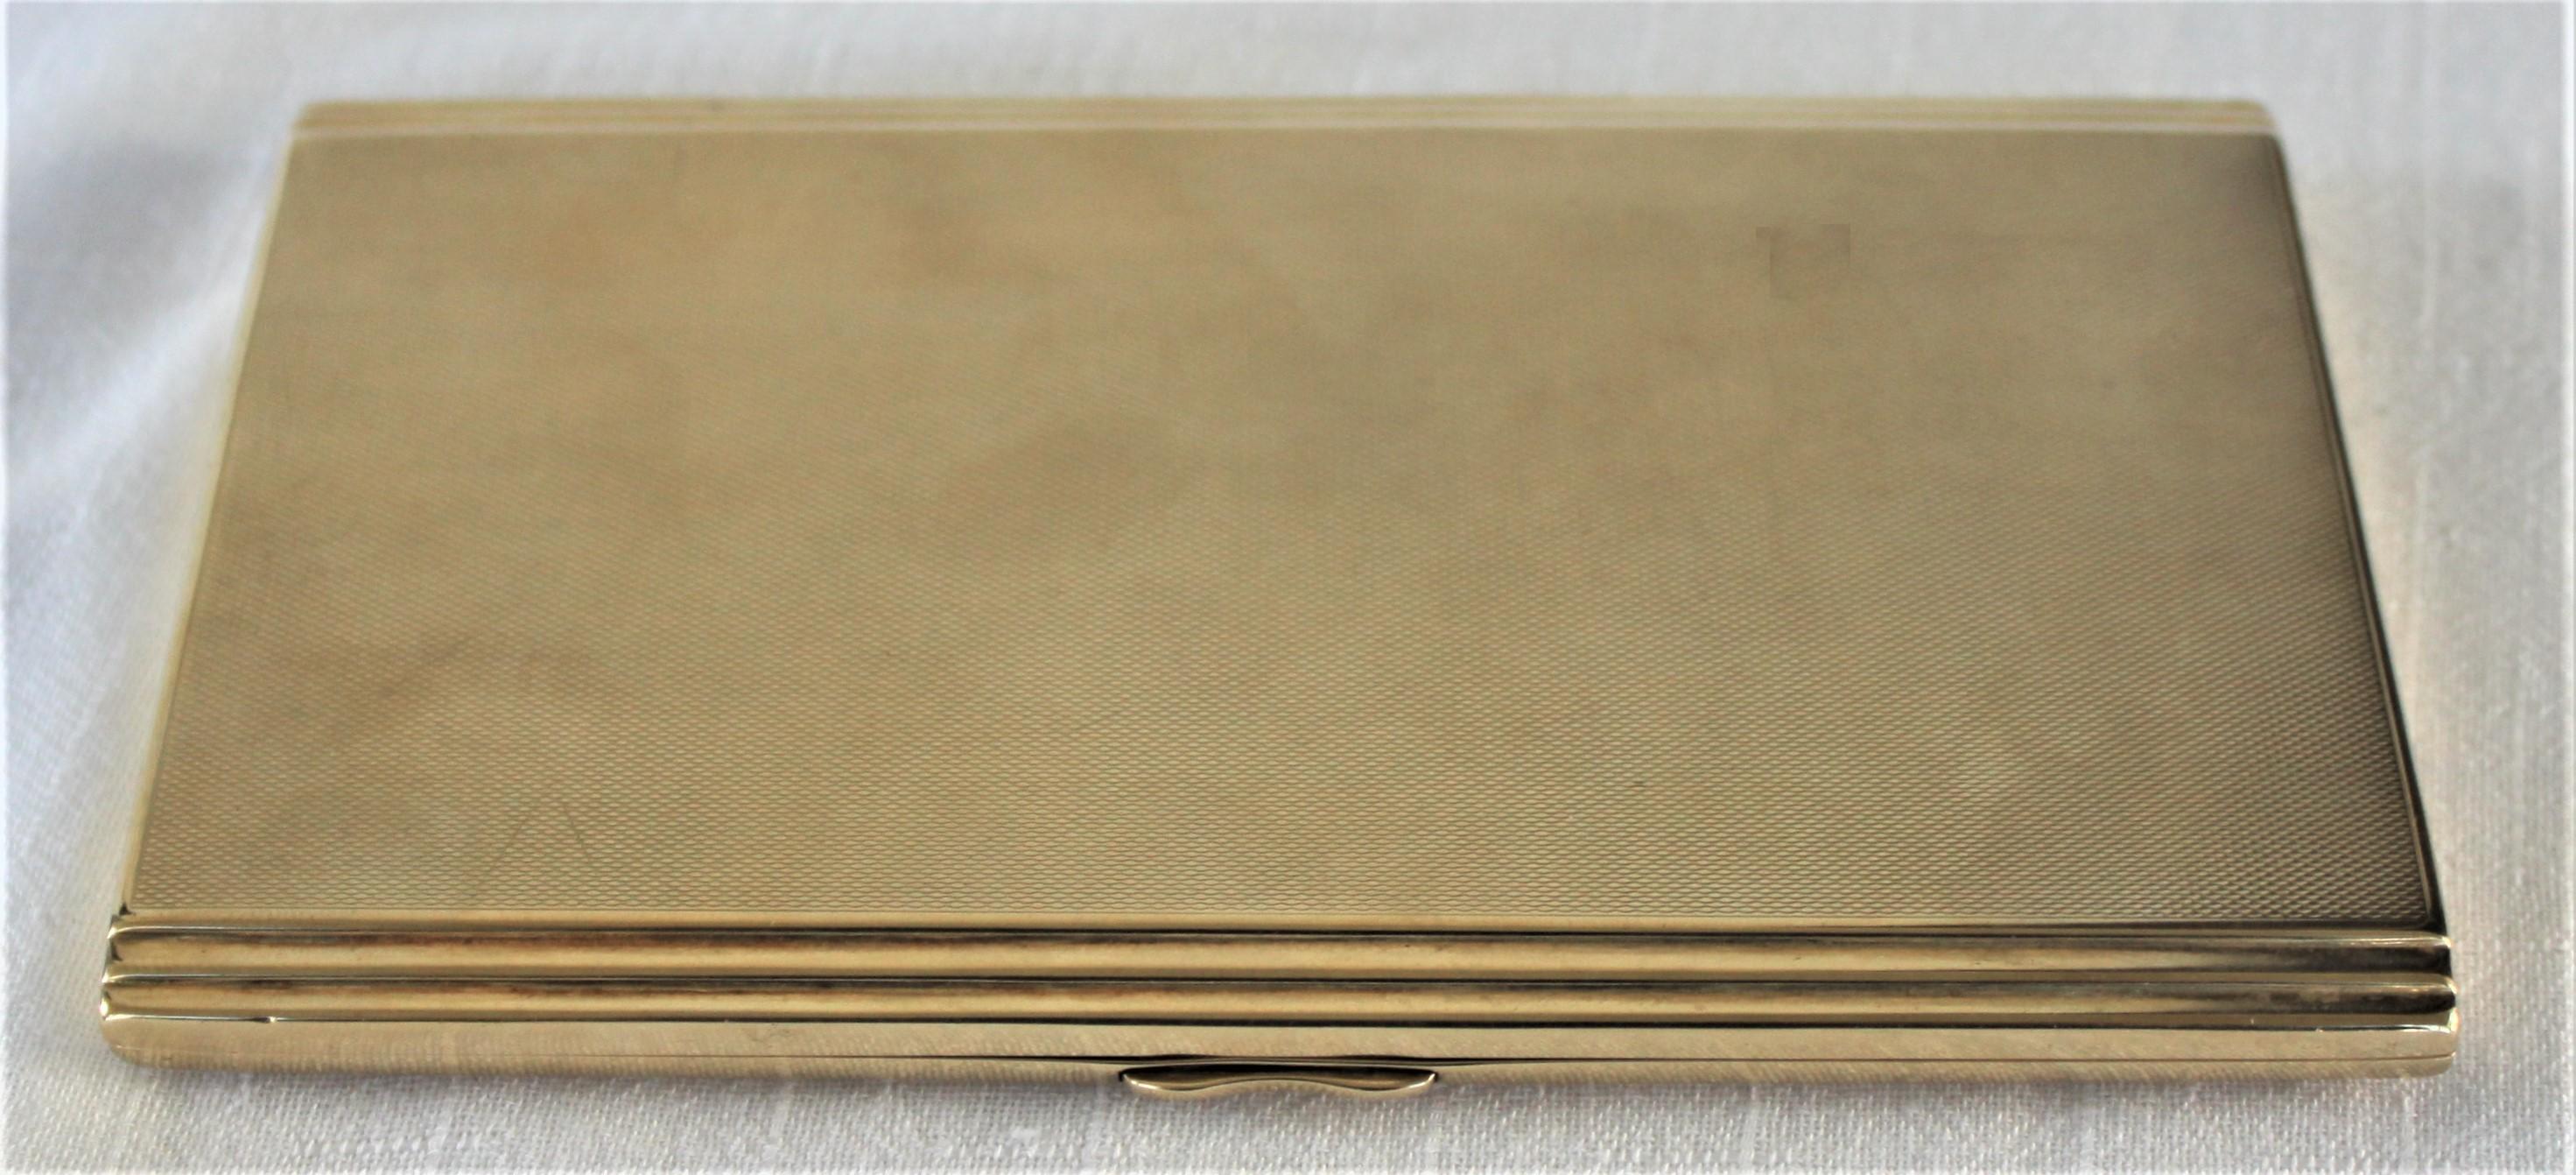 This large and substantial solid 9-karat yellow gold cigarette case was made in Birmingham England and dates to the late 1930s. The case was sold by the renowned Birks Department Store chain and was presumed to have been an item from their 'Estate